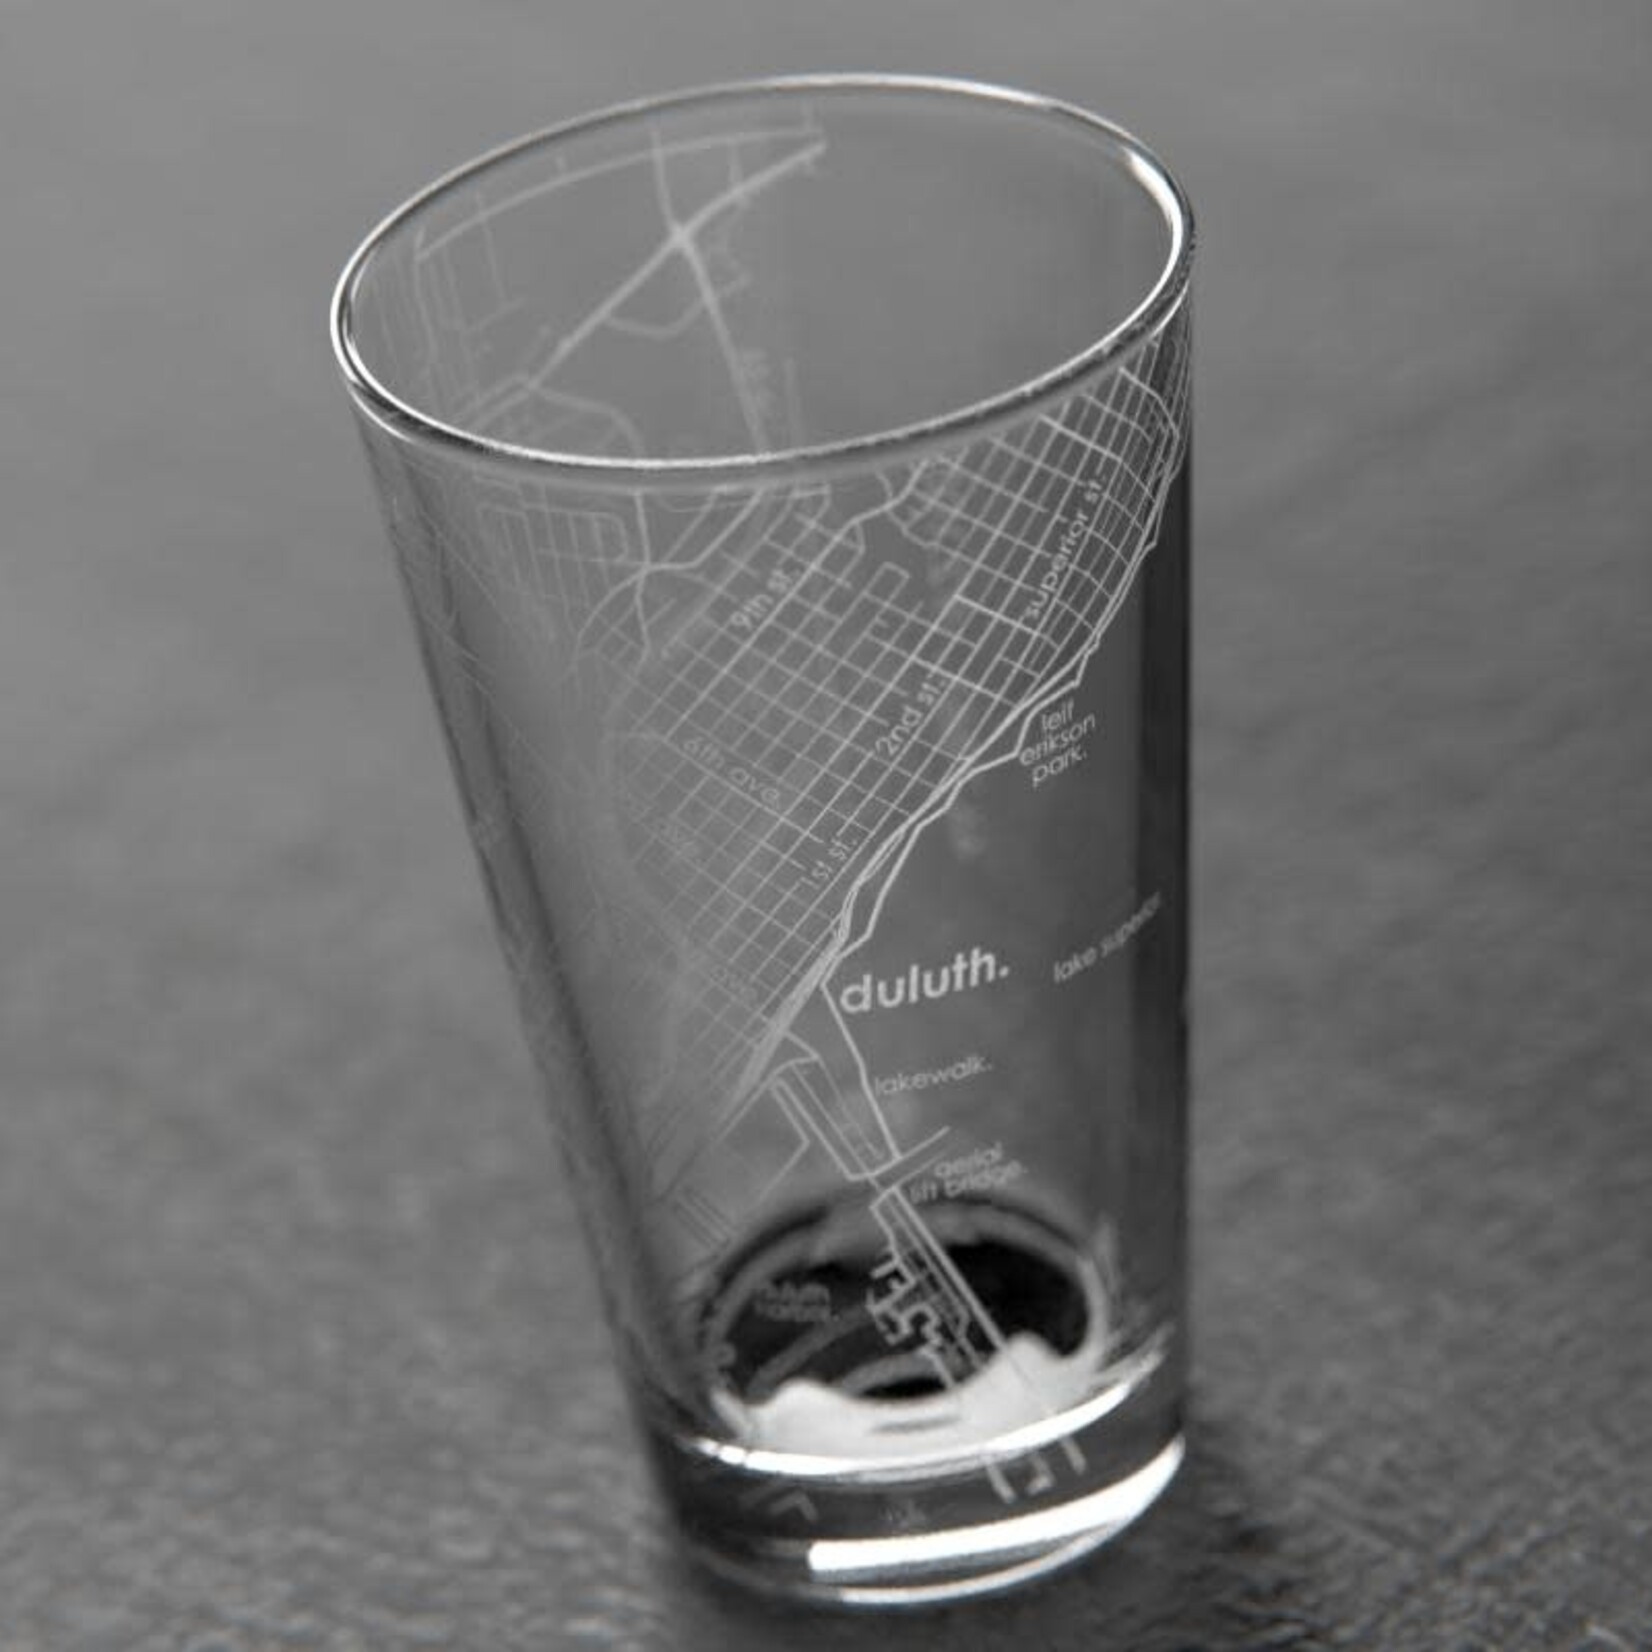 Well Told Duluth MAP Pint Glass